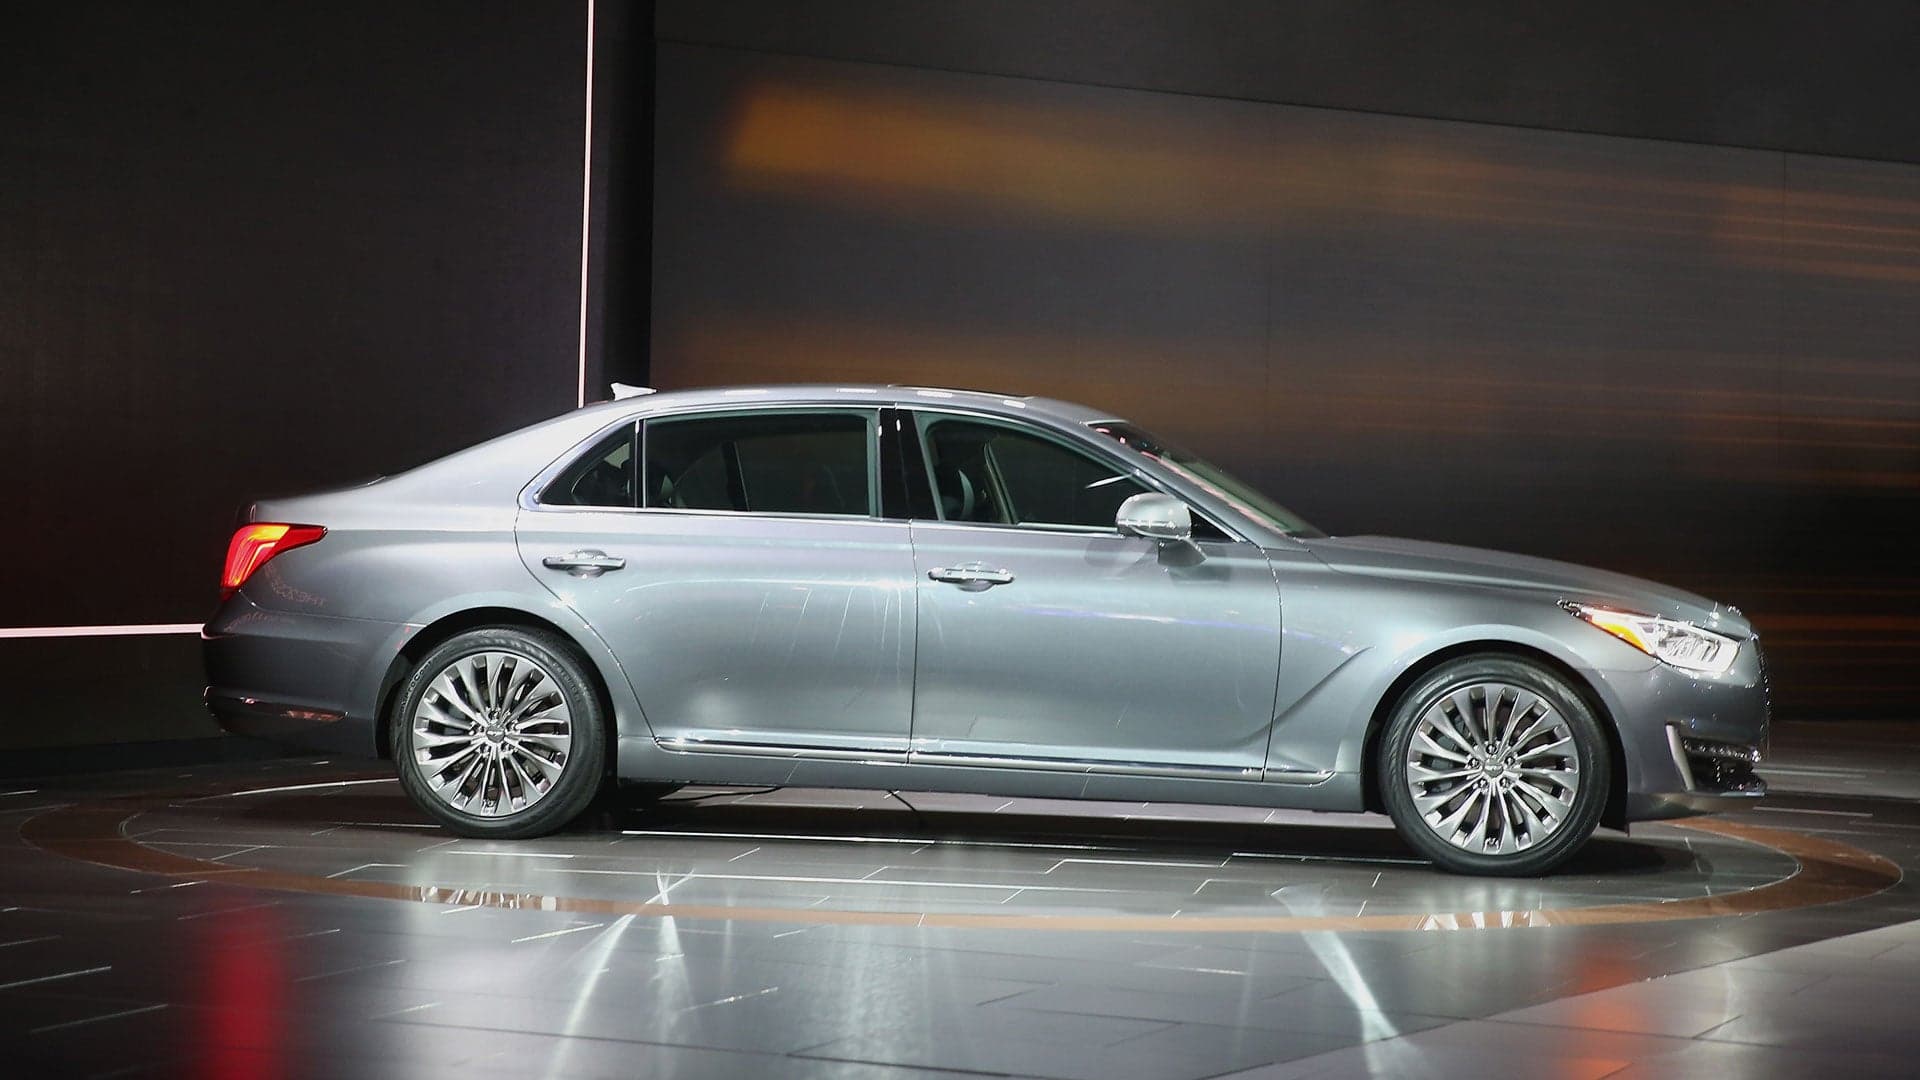 Genesis May Be the Strongest Brand at the 2016 Detroit Auto Show